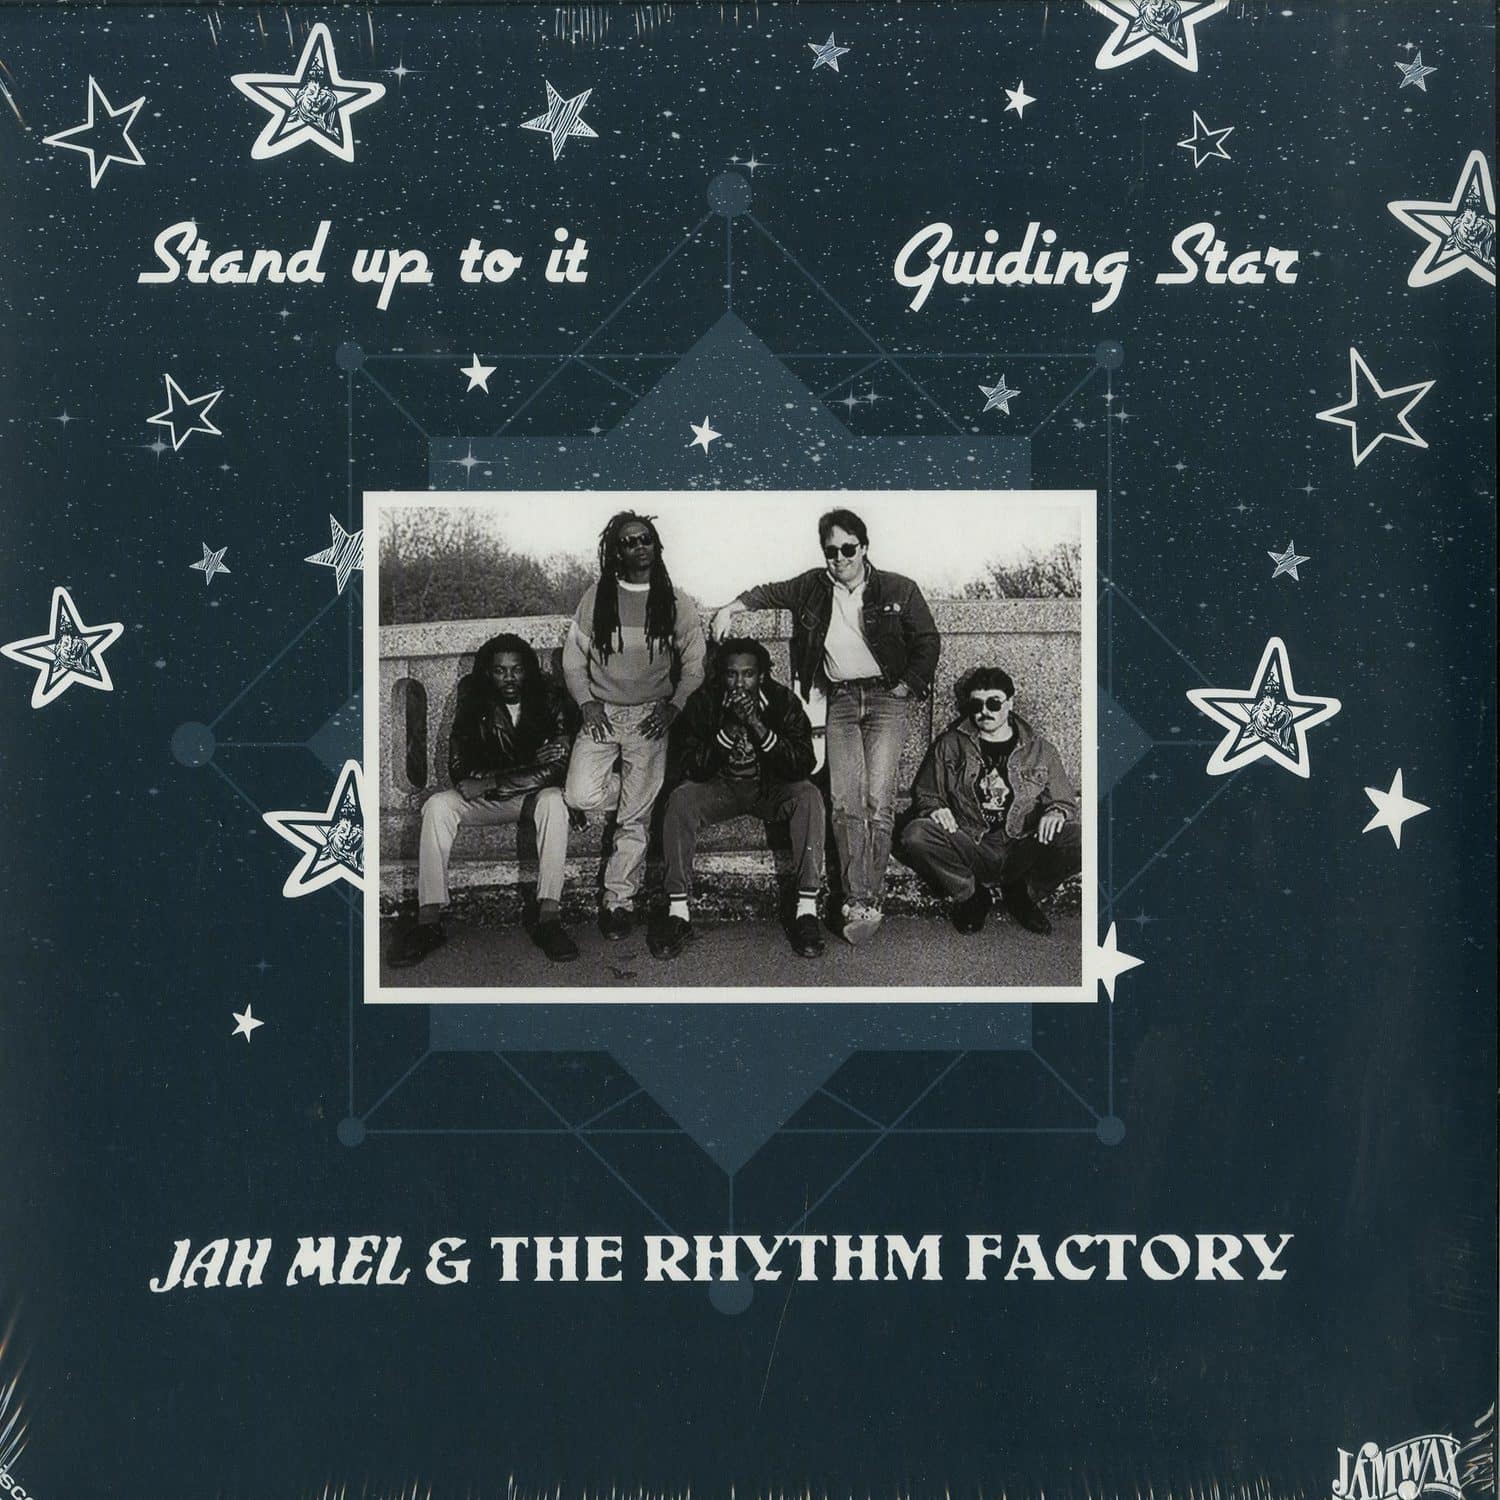 Jah Mel & The Rhythm Factory - STAND UP TO IT / GUIDING STAR